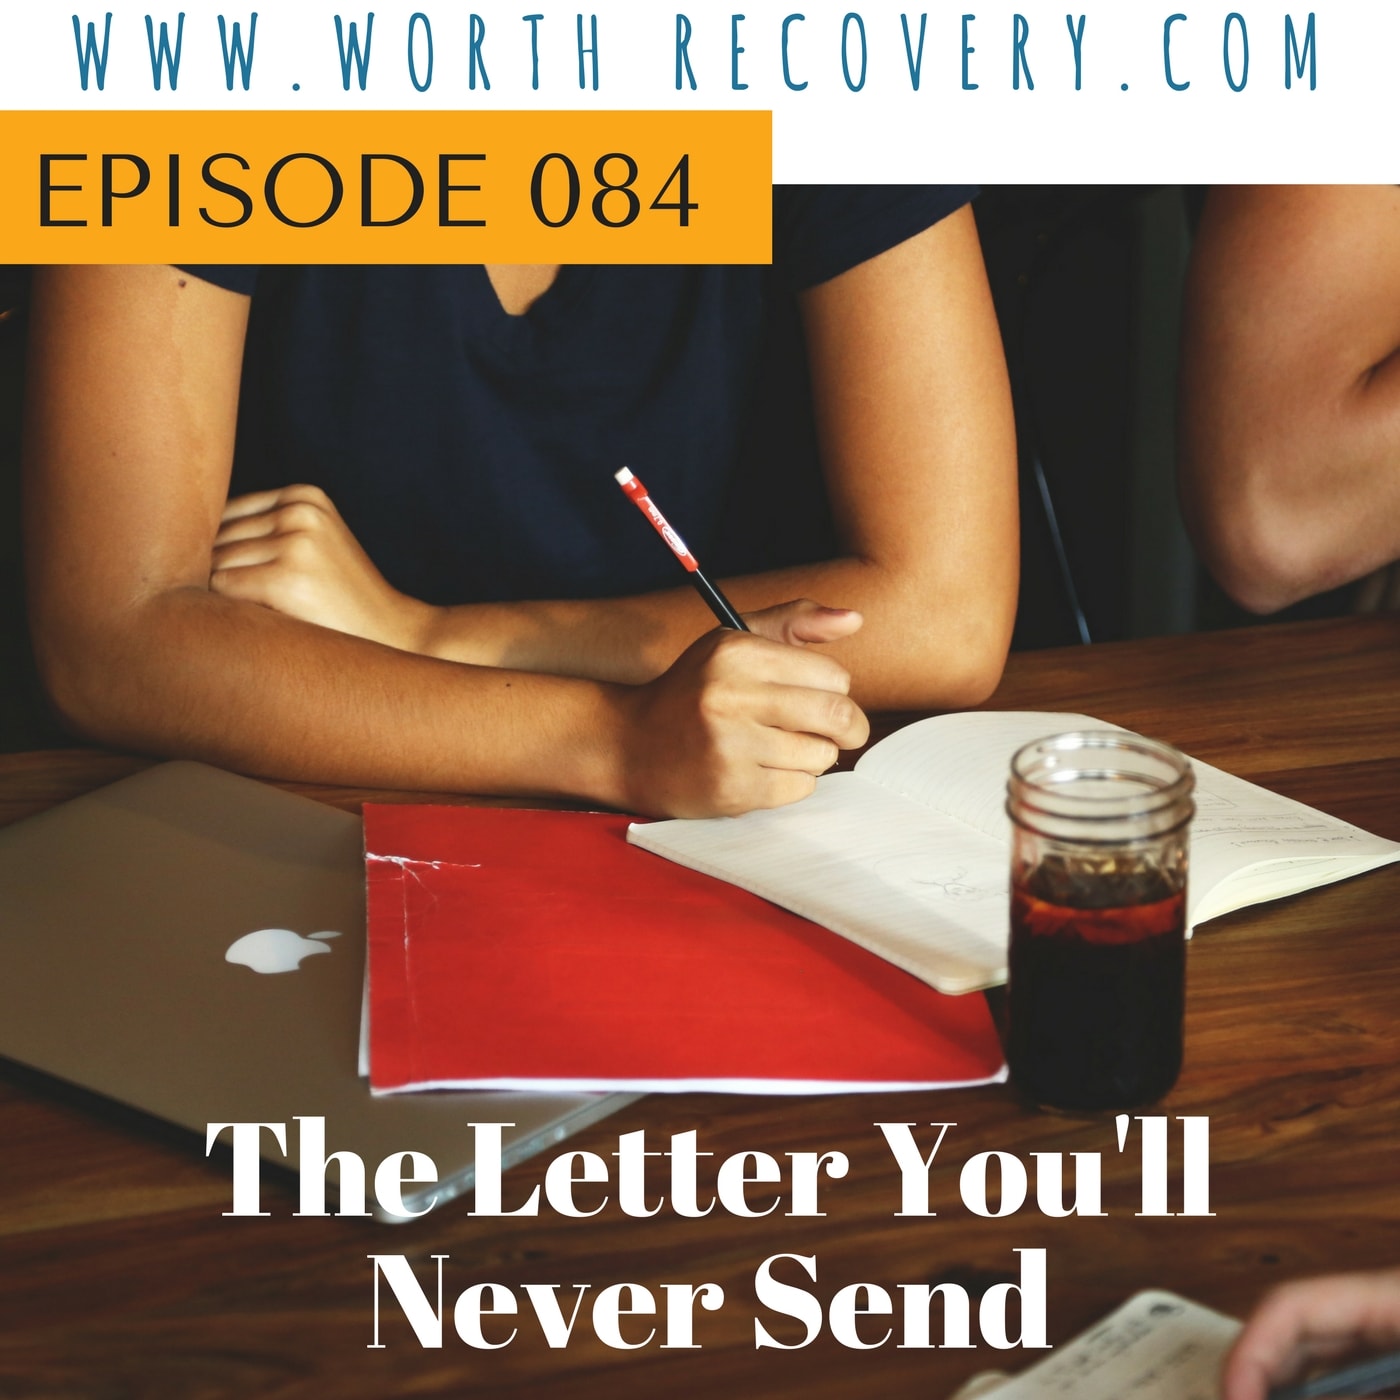 Episode 084: The Letter You’ll Never Send